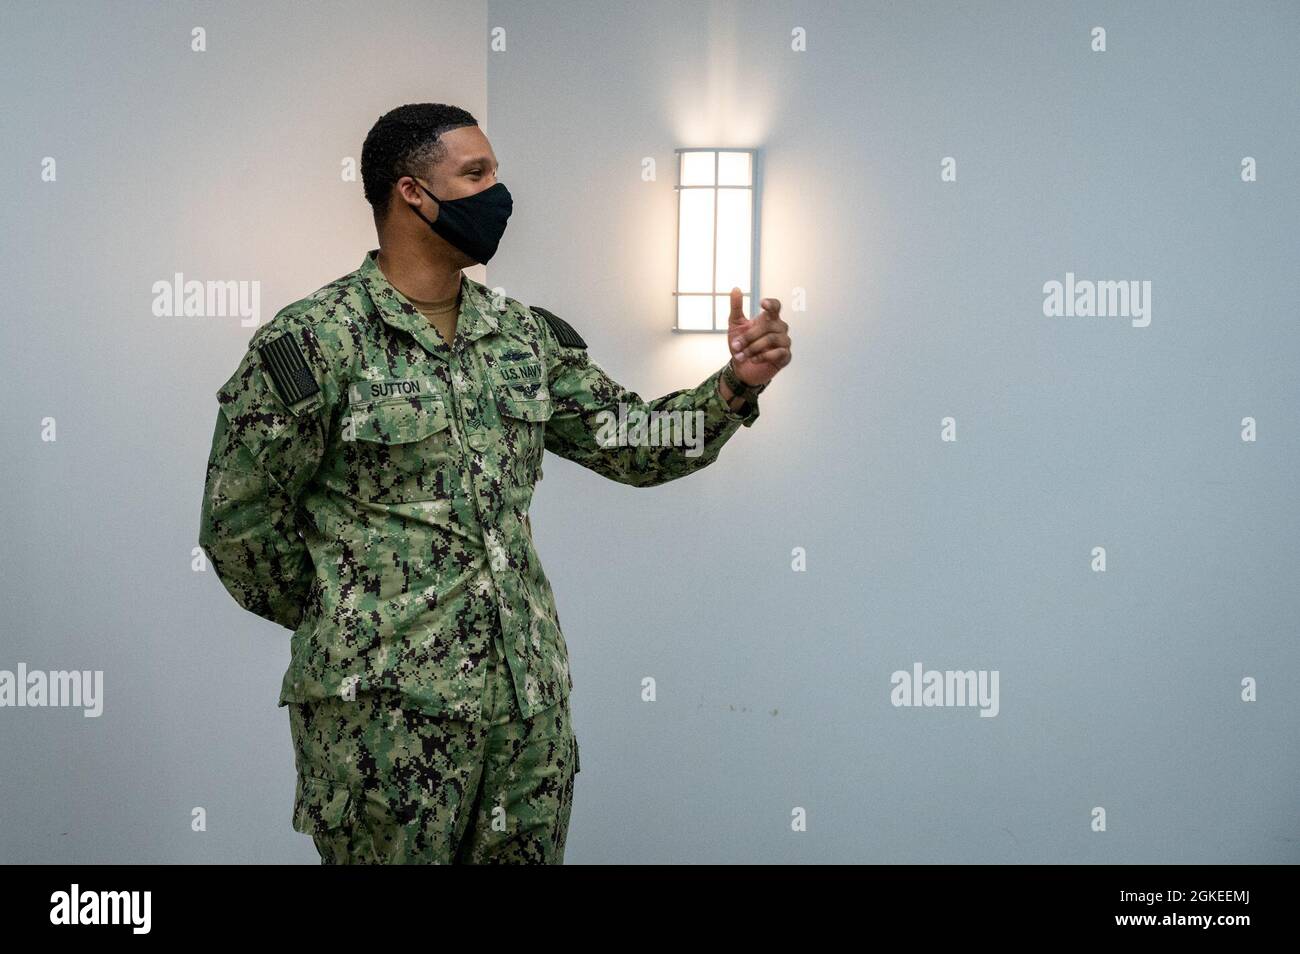 WASHINGTON, DC (March 30, 2021) – Boatswain’s Mate 1st Class Michael Sutton addresses colleagues before an end-of-tour award ceremony held in his honor on Washington Navy Yard. Stock Photo